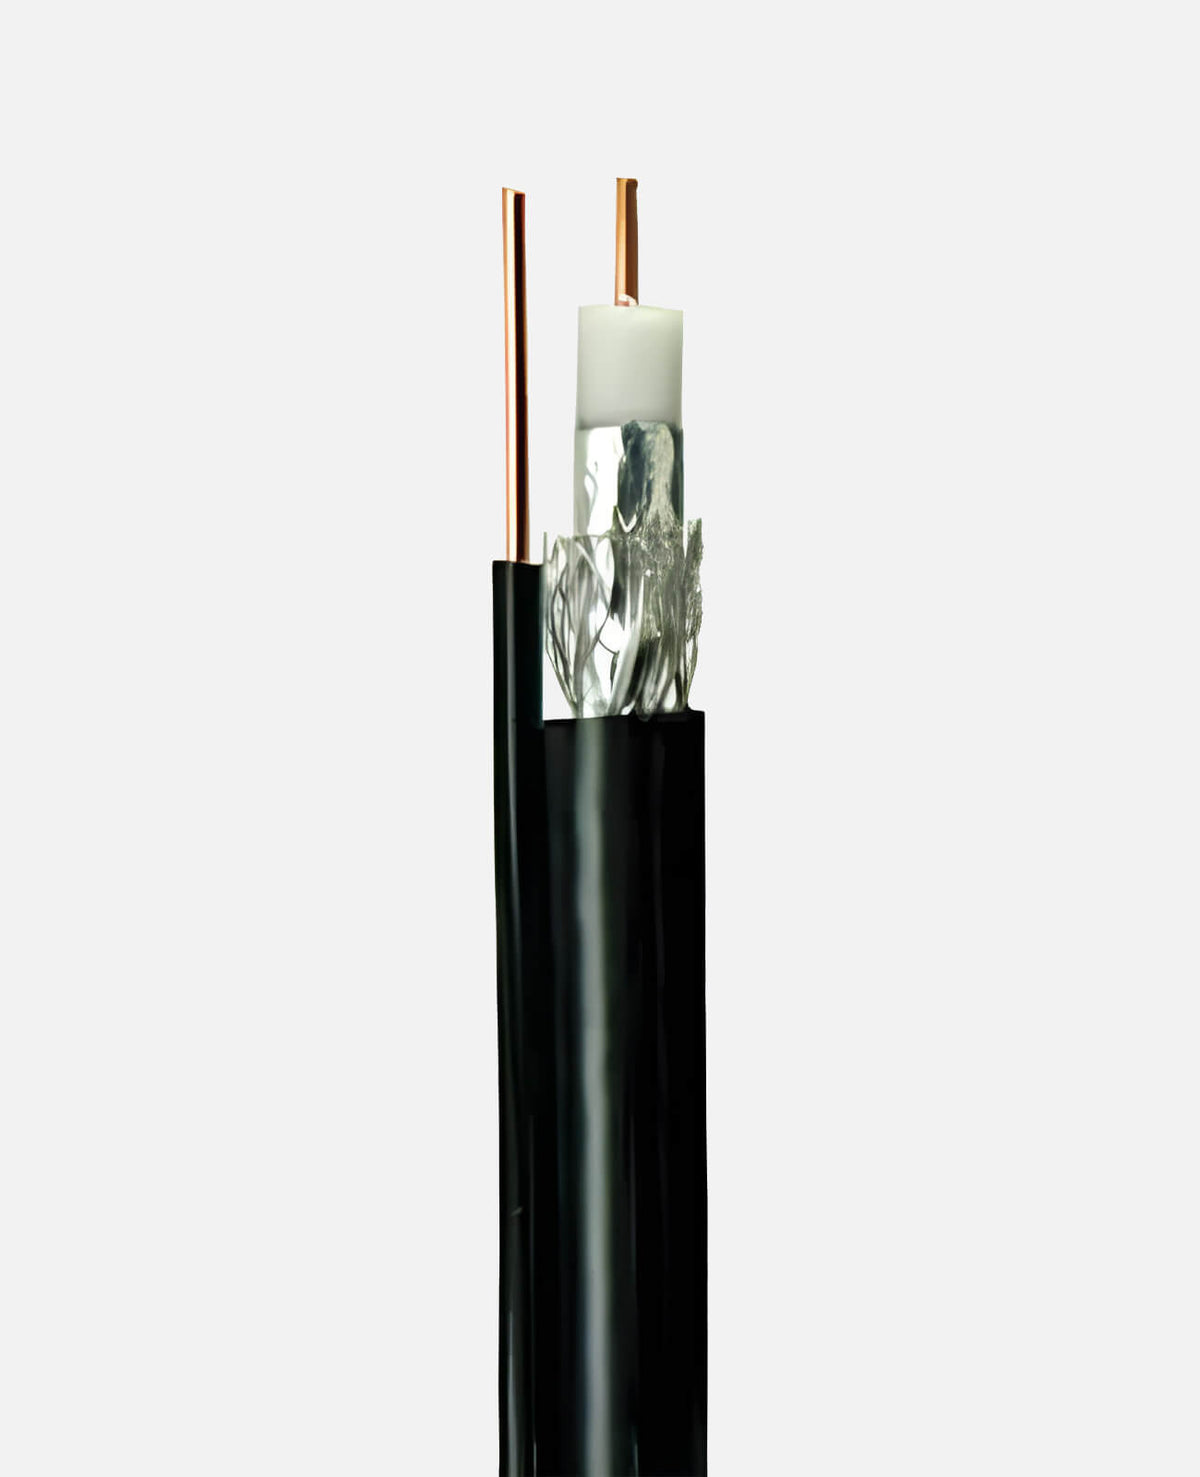 RG6 Coaxial Cable Solid Copper, 1000′ Single with Ground, Black, 1000’ DIRECTV, ATT, Excede Approved (CB4B06DSCR0-05)